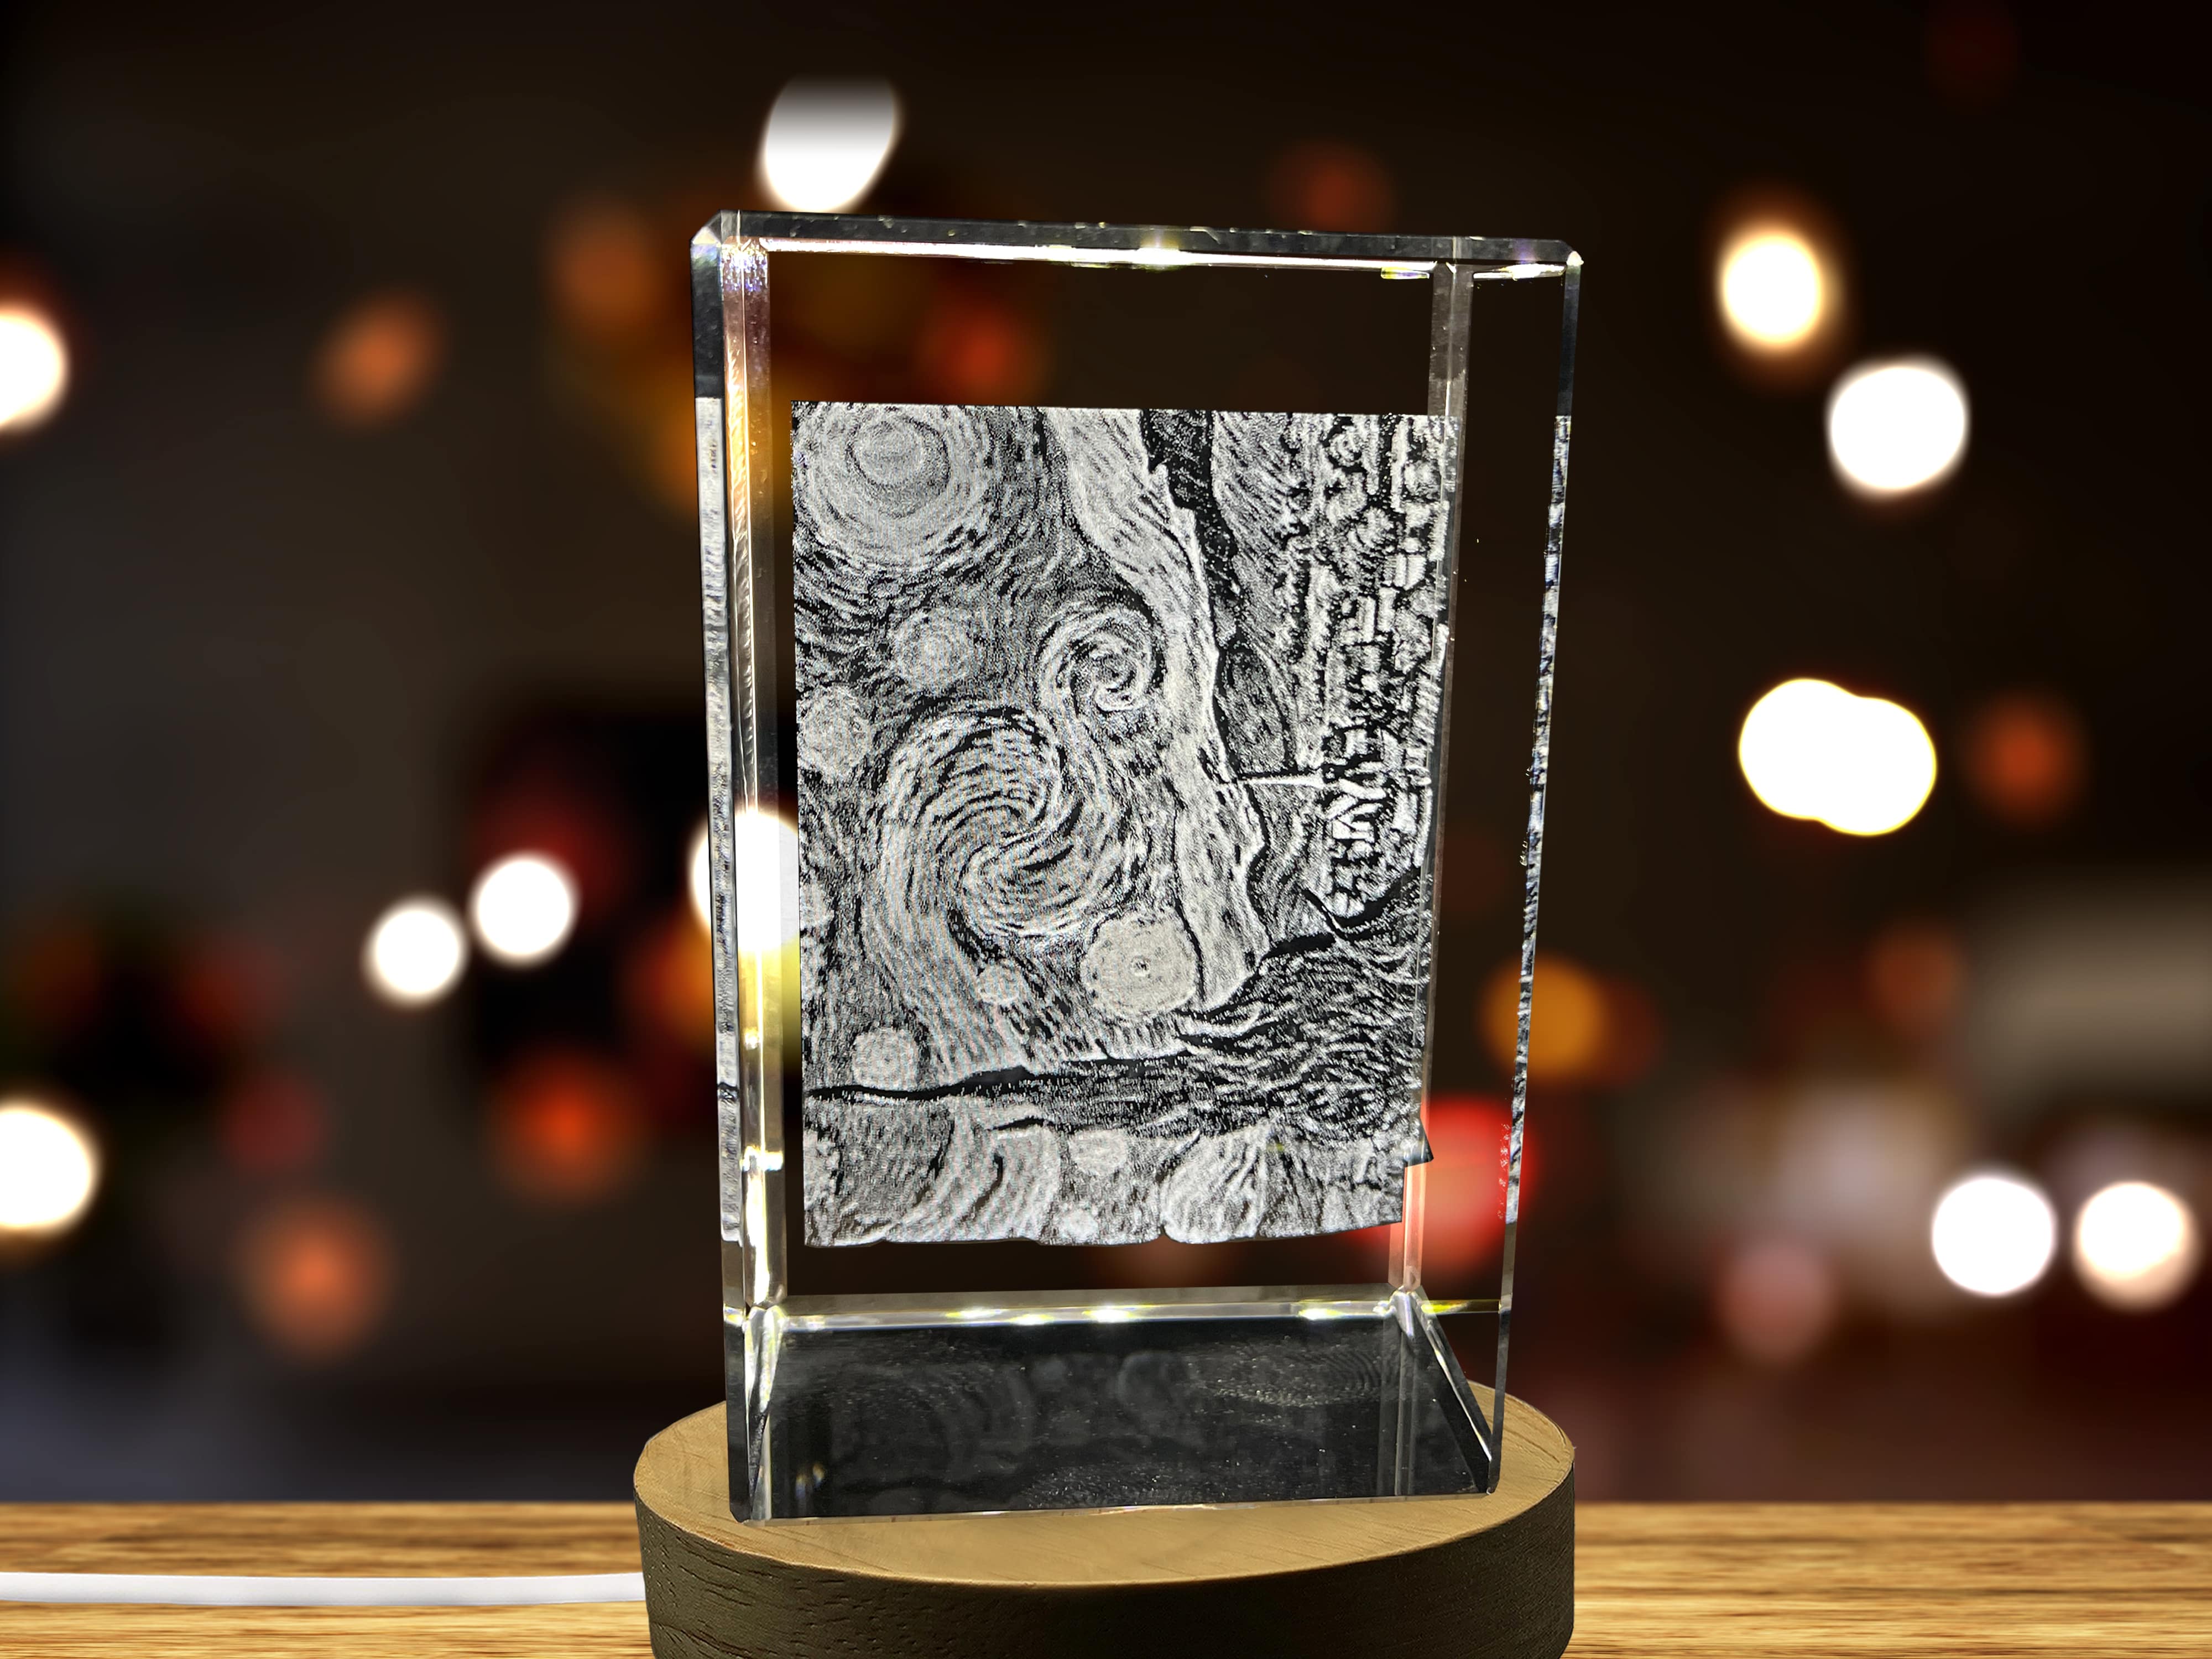 The Starry Night 3D Engraved Crystal Decor A&B Crystal Collection